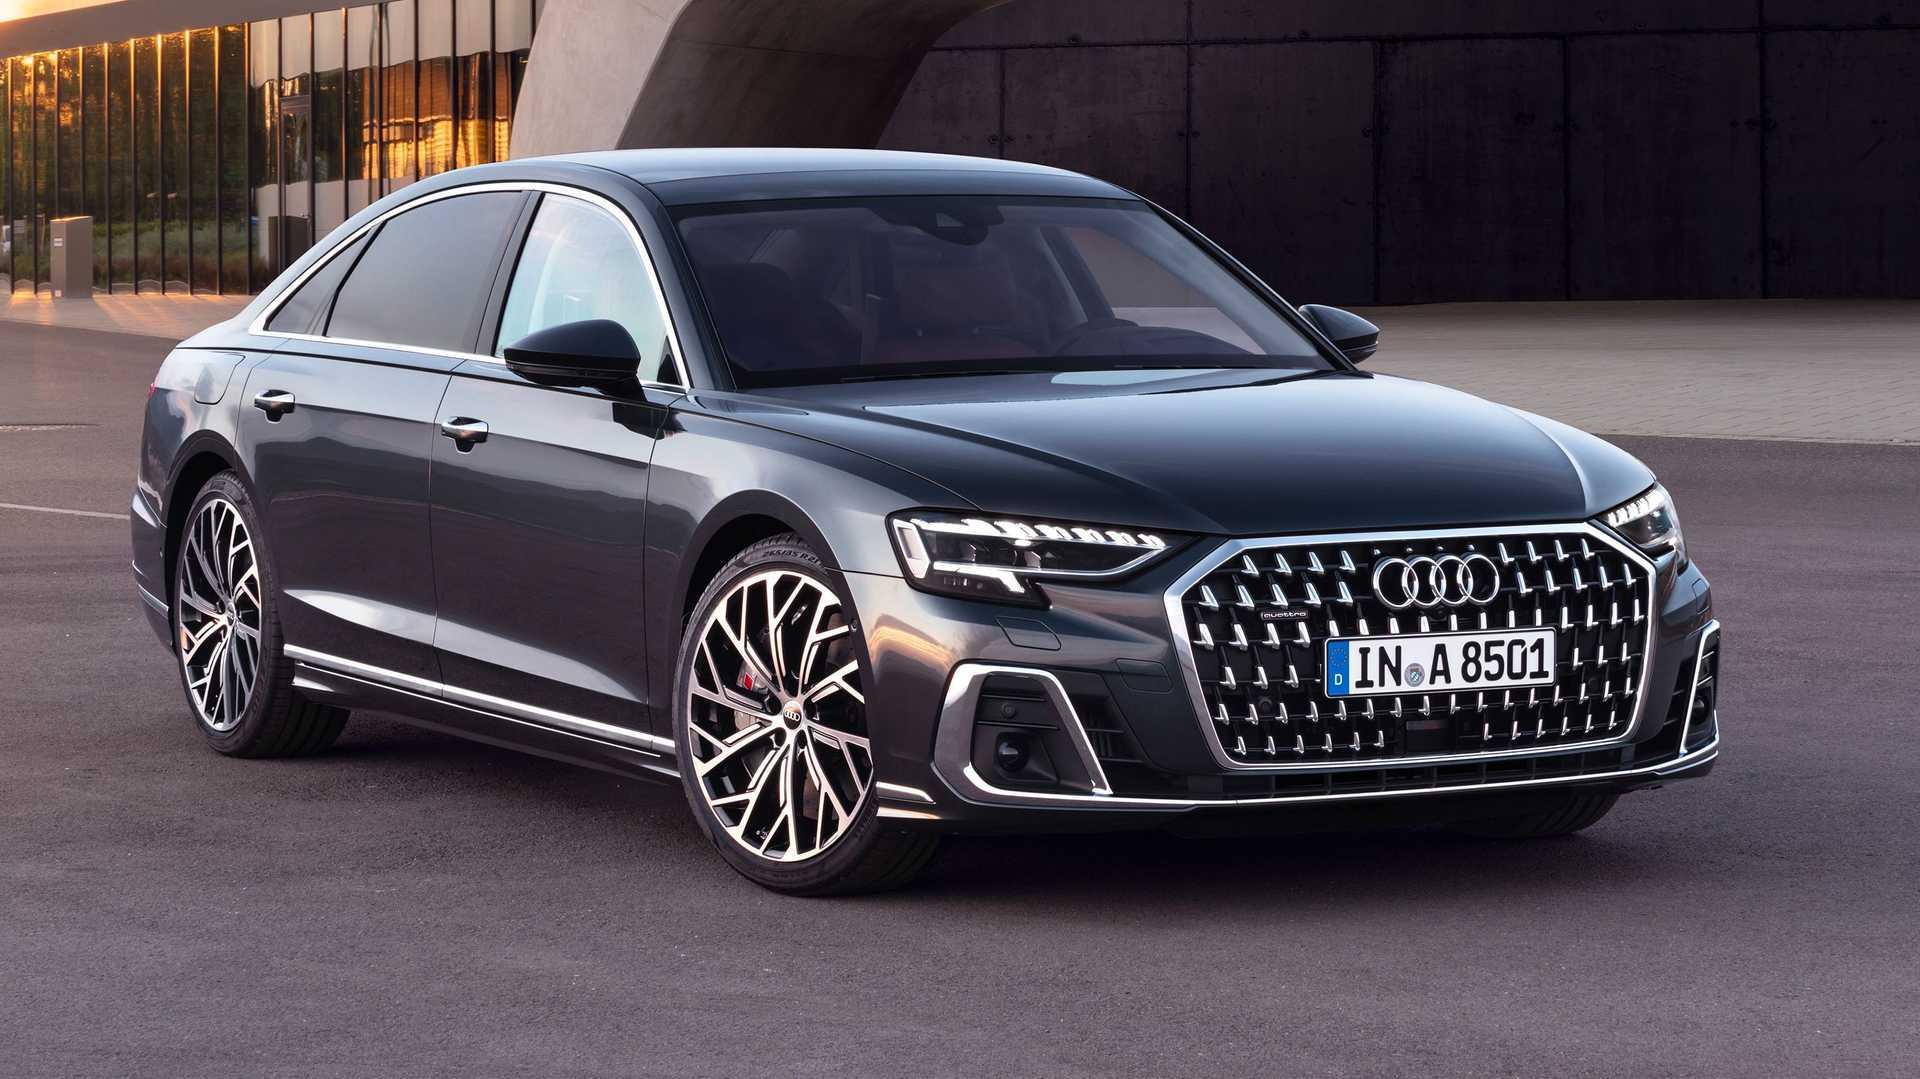 Audi A8 Facelift Revealed With Wider Grille And Updated Lights